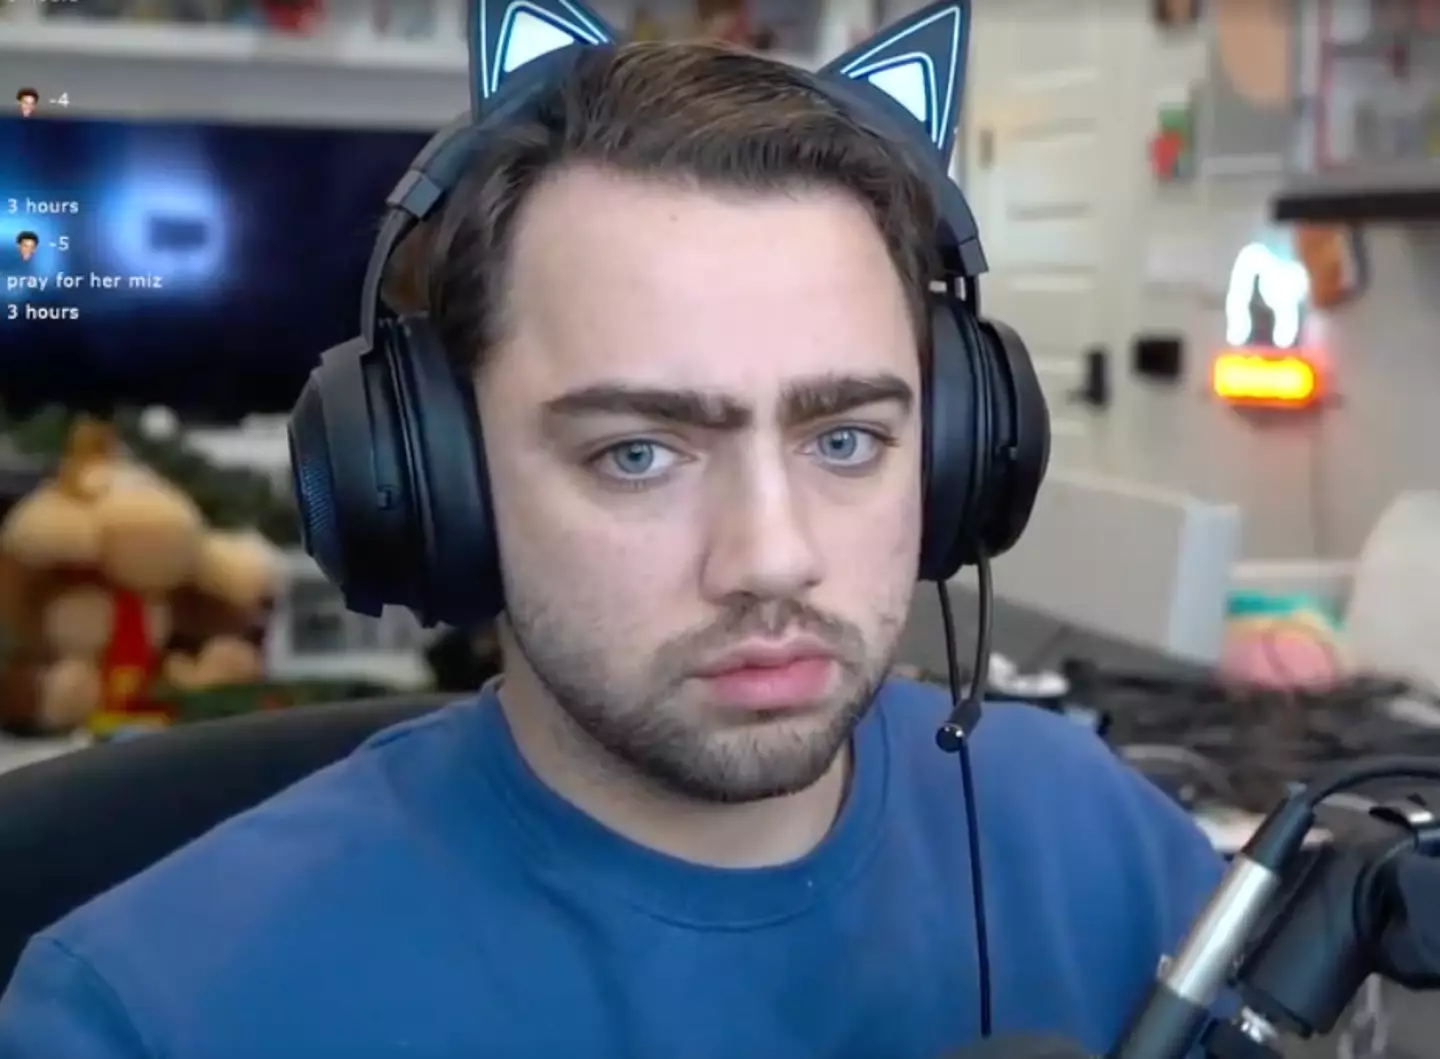 Mizkif was up by thousands before he lost everything.